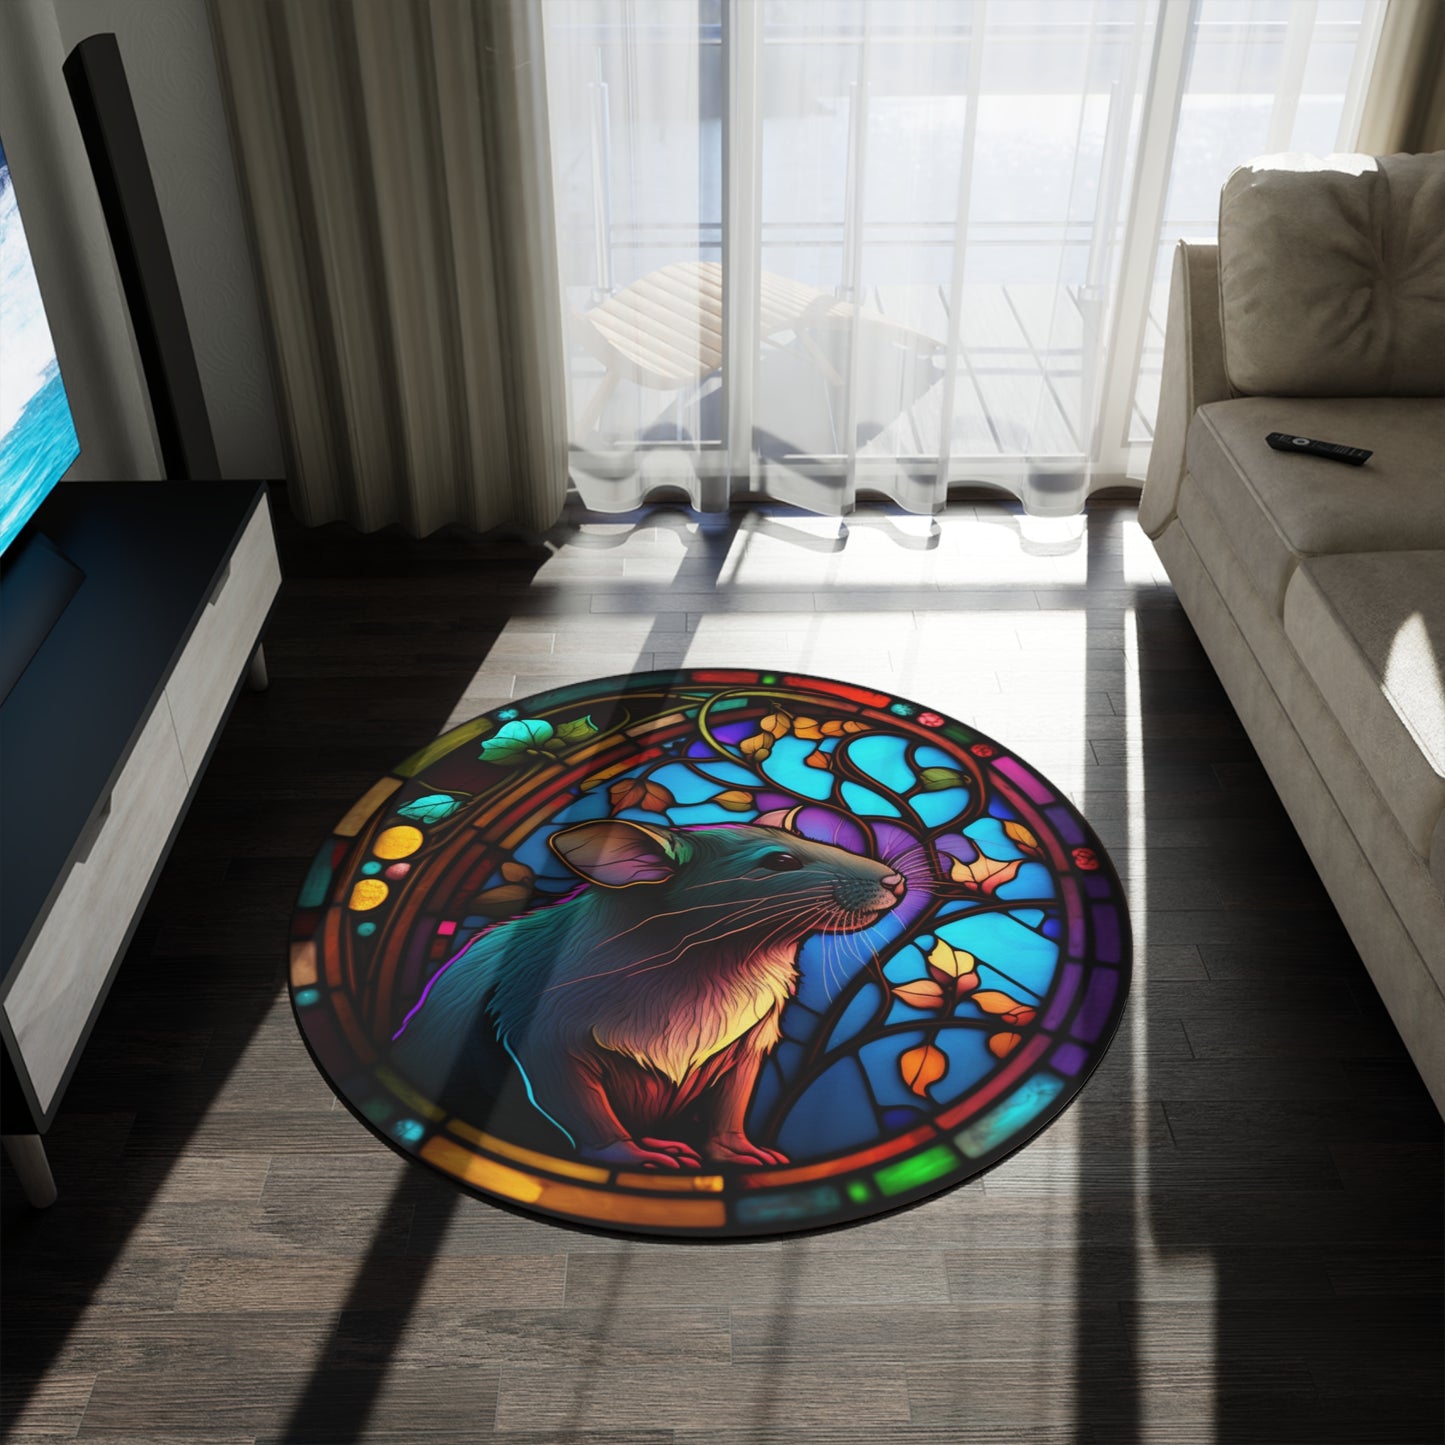 Stained glass rat rug